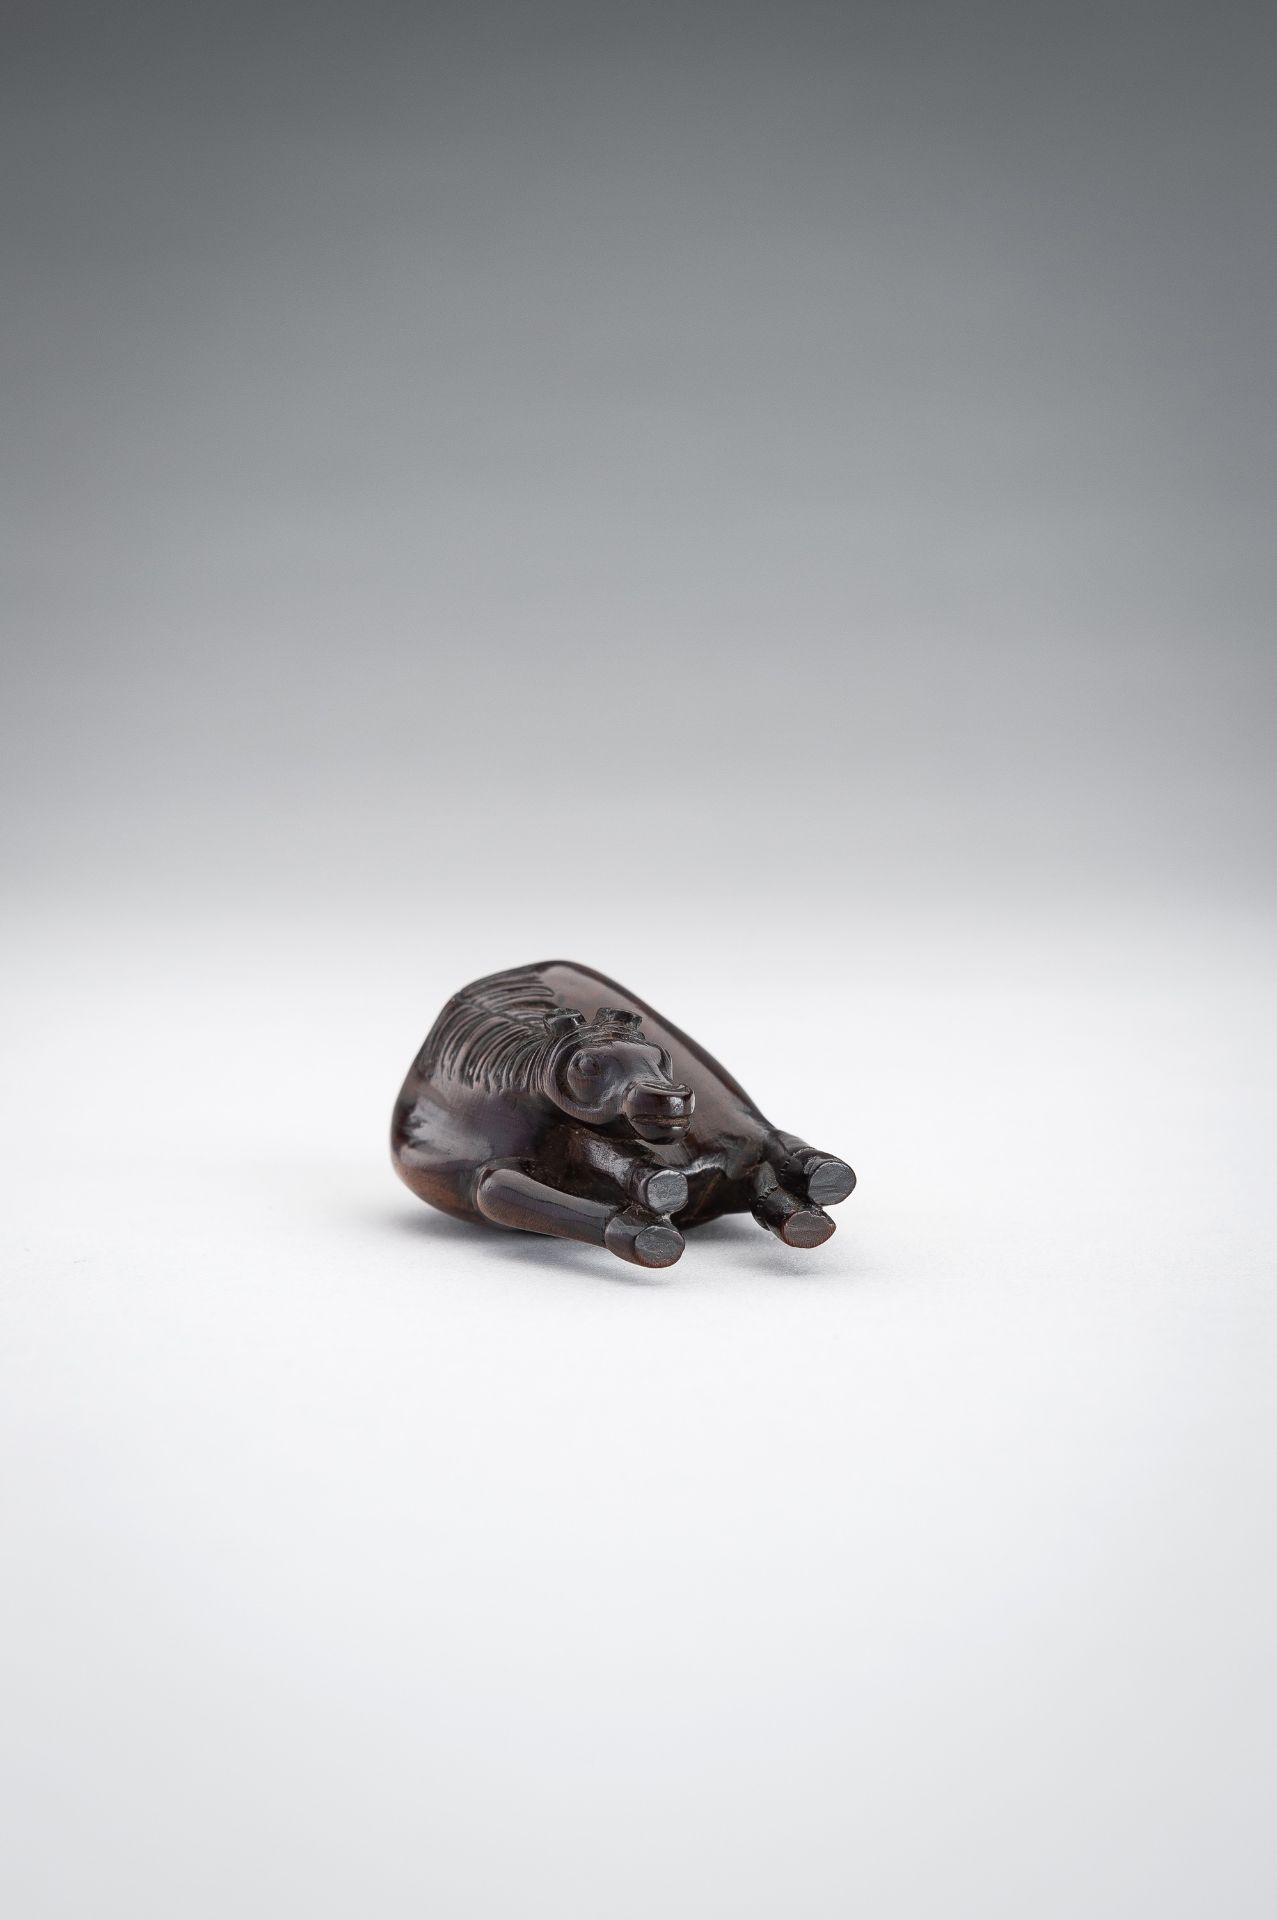 A LARGE WOOD NETSUKE OF A STANDING HORSE - Image 10 of 10